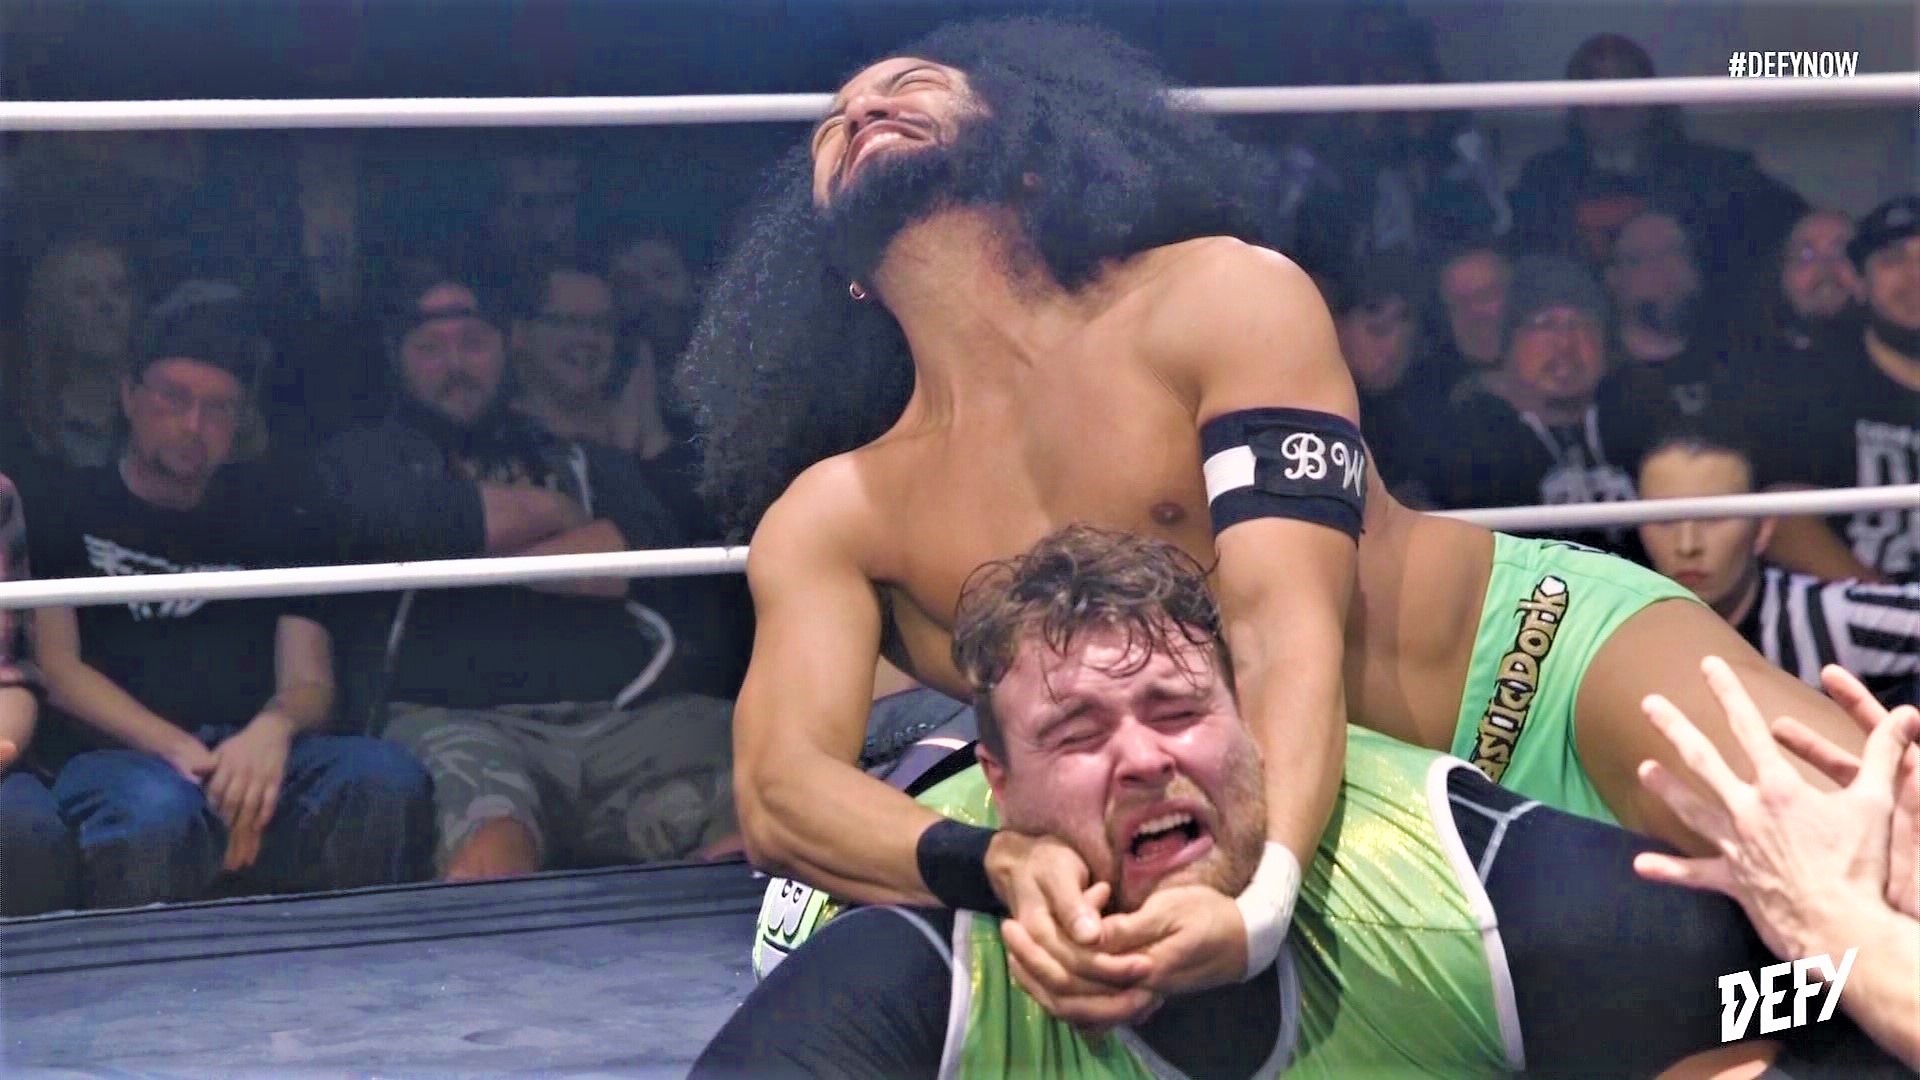 "They get rowdy, they get loud, these guys live, die and breathe Defy Wrestling." #k5evening